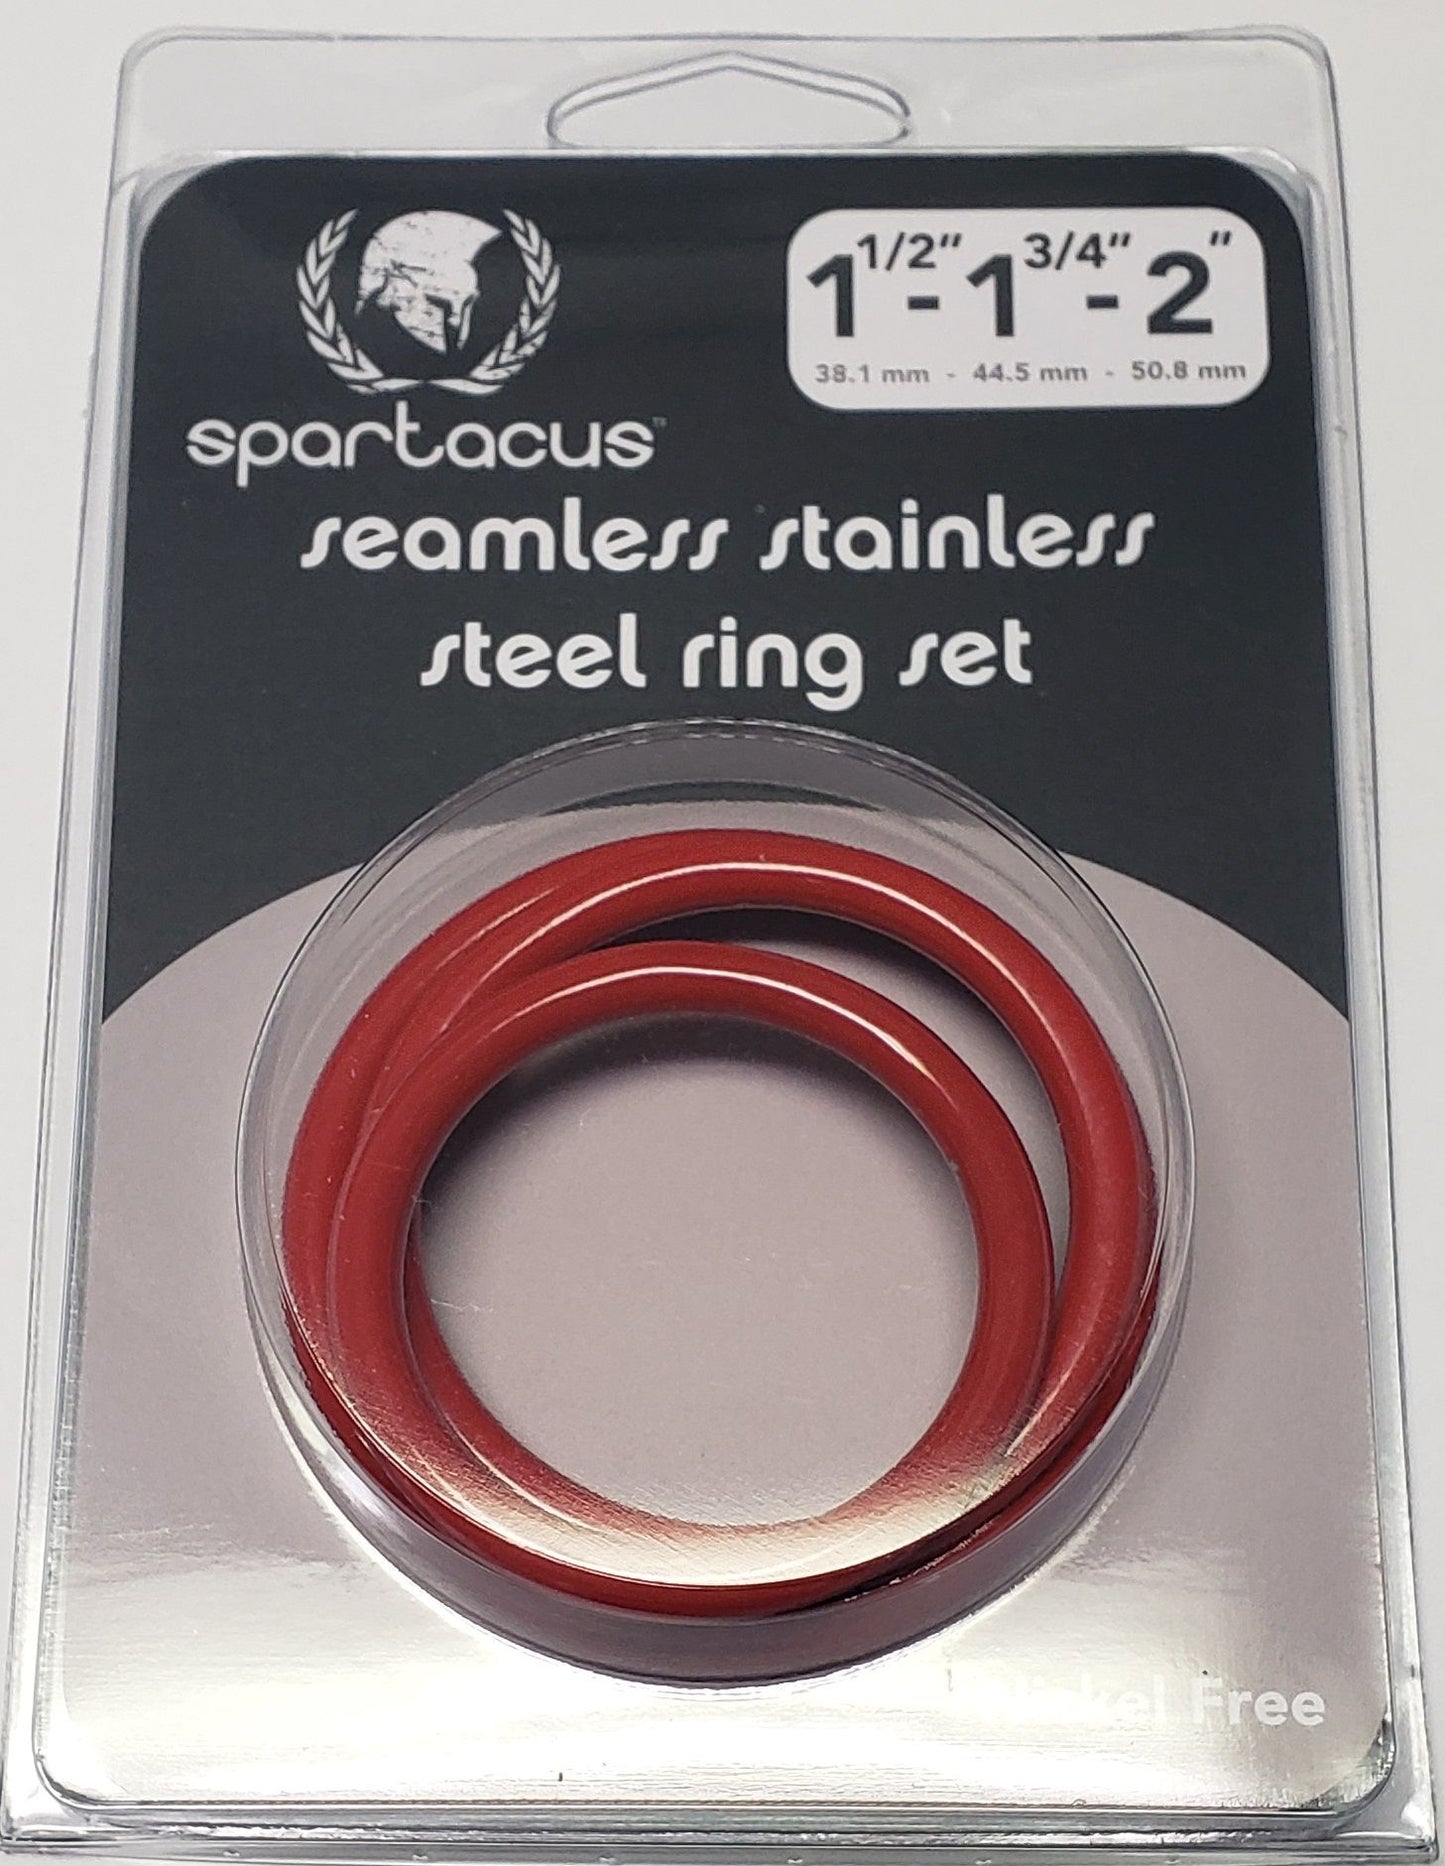 The red Seamless Stainless Steel Ring Set.